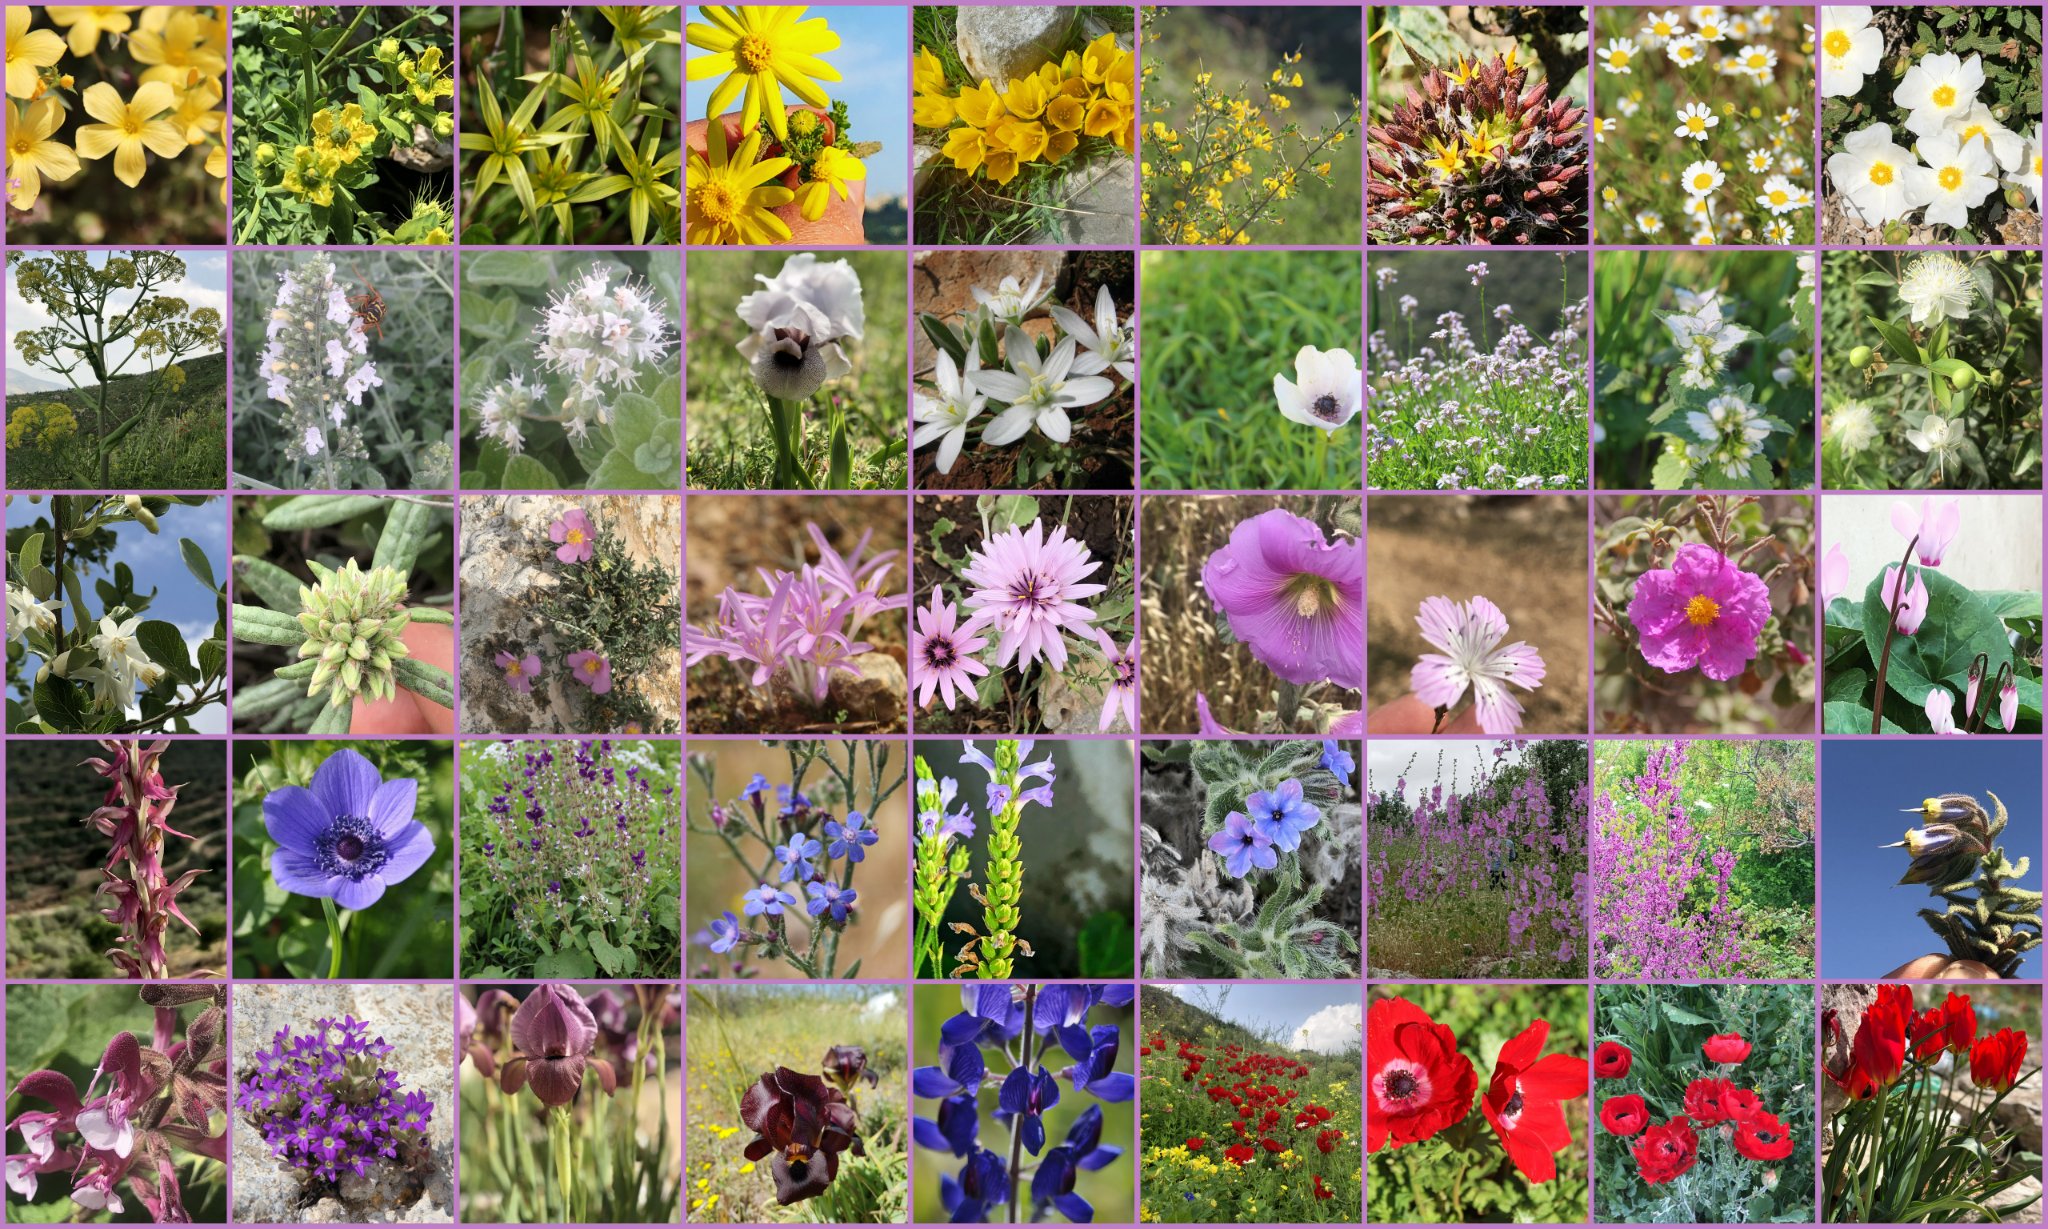 Analysis of floristic composition and species diversity of vascular plants native to the State of Palestine (West Bank and Gaza Strip)